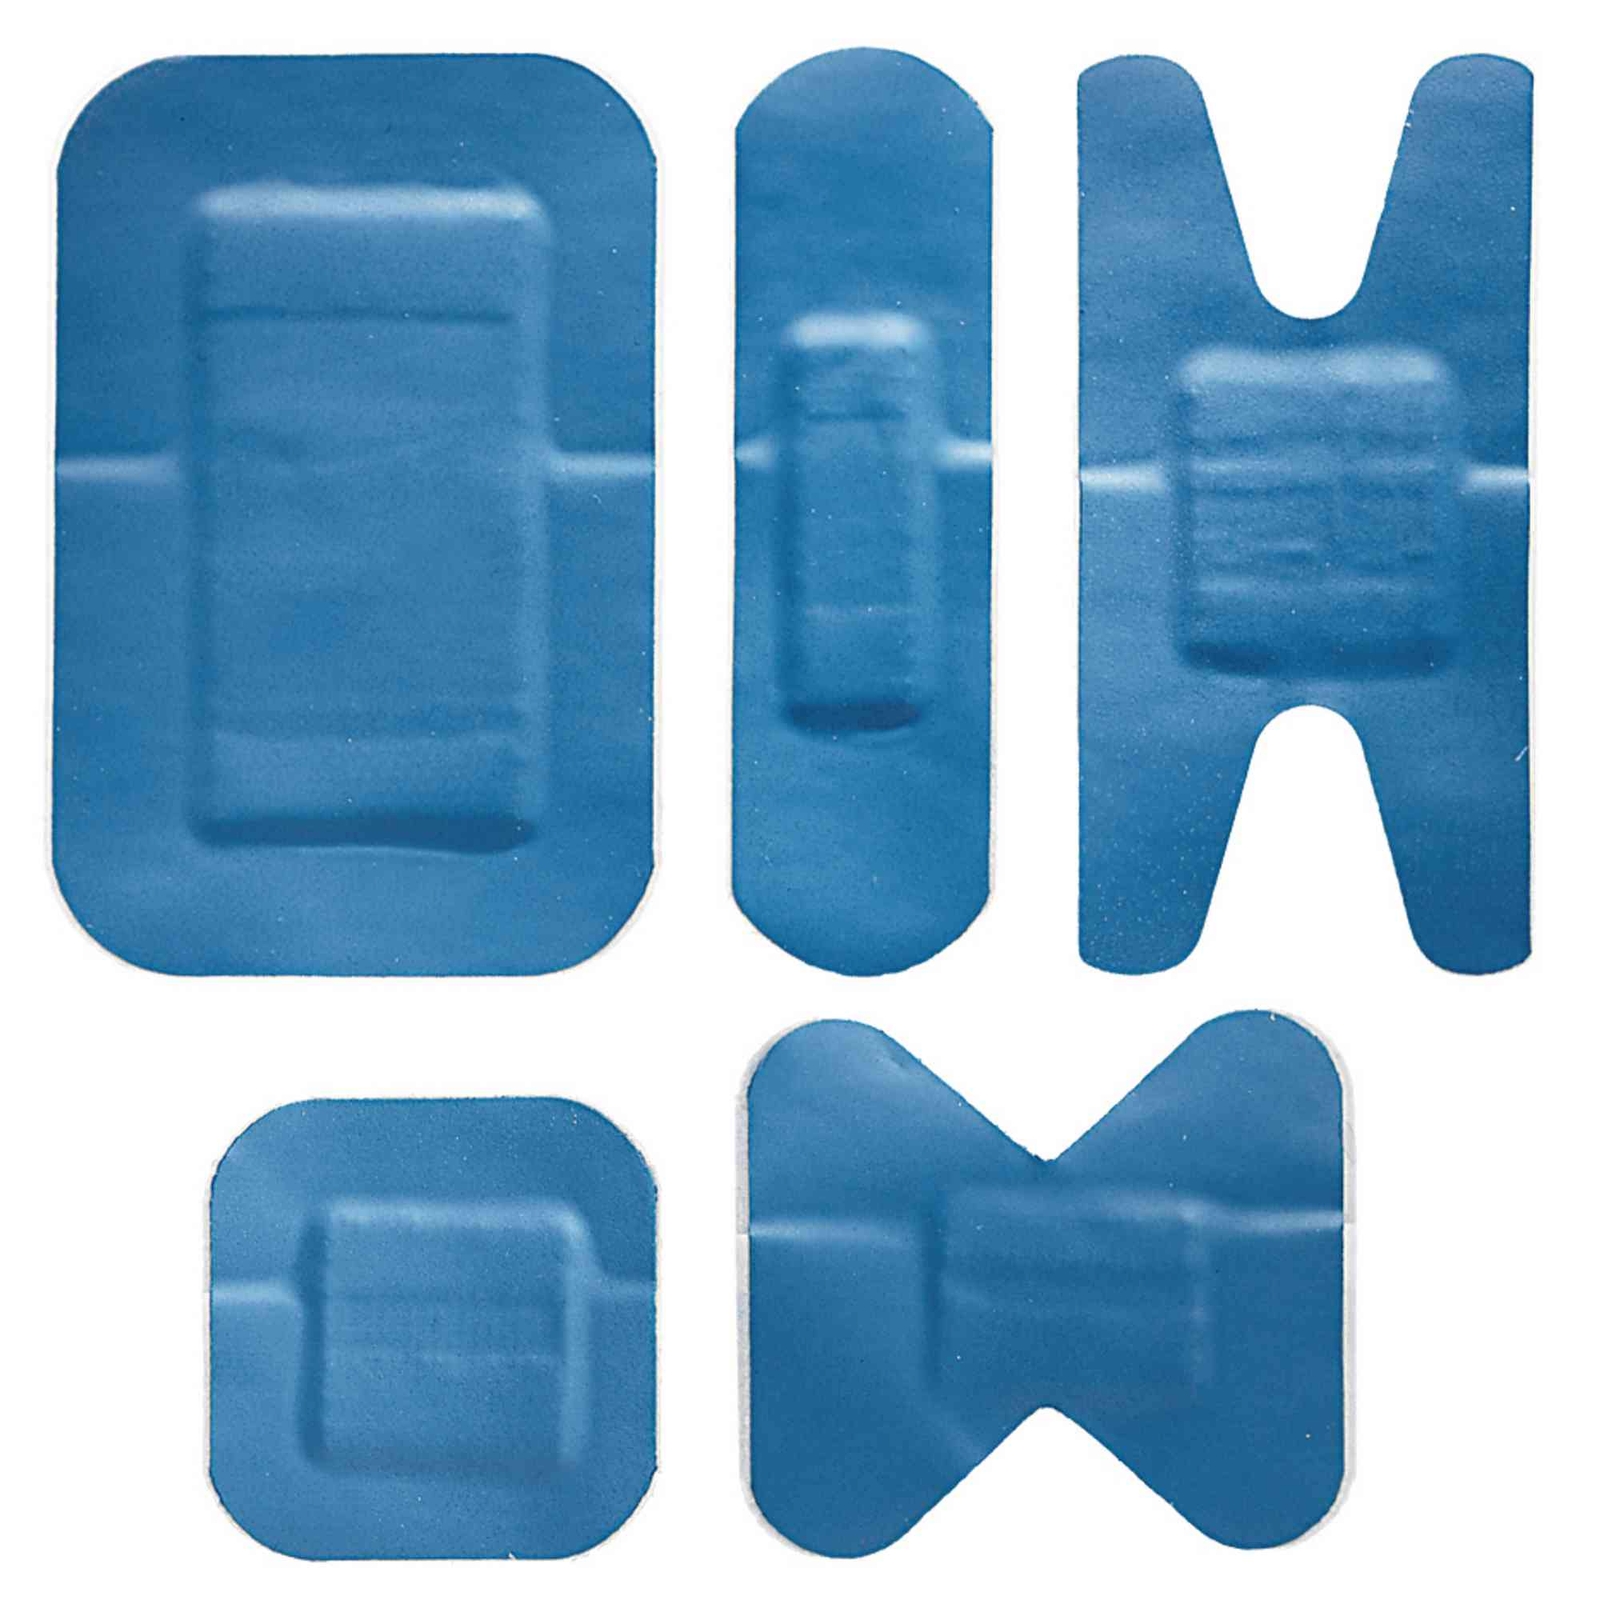 X-Ray Detectable Plasters - Assorted